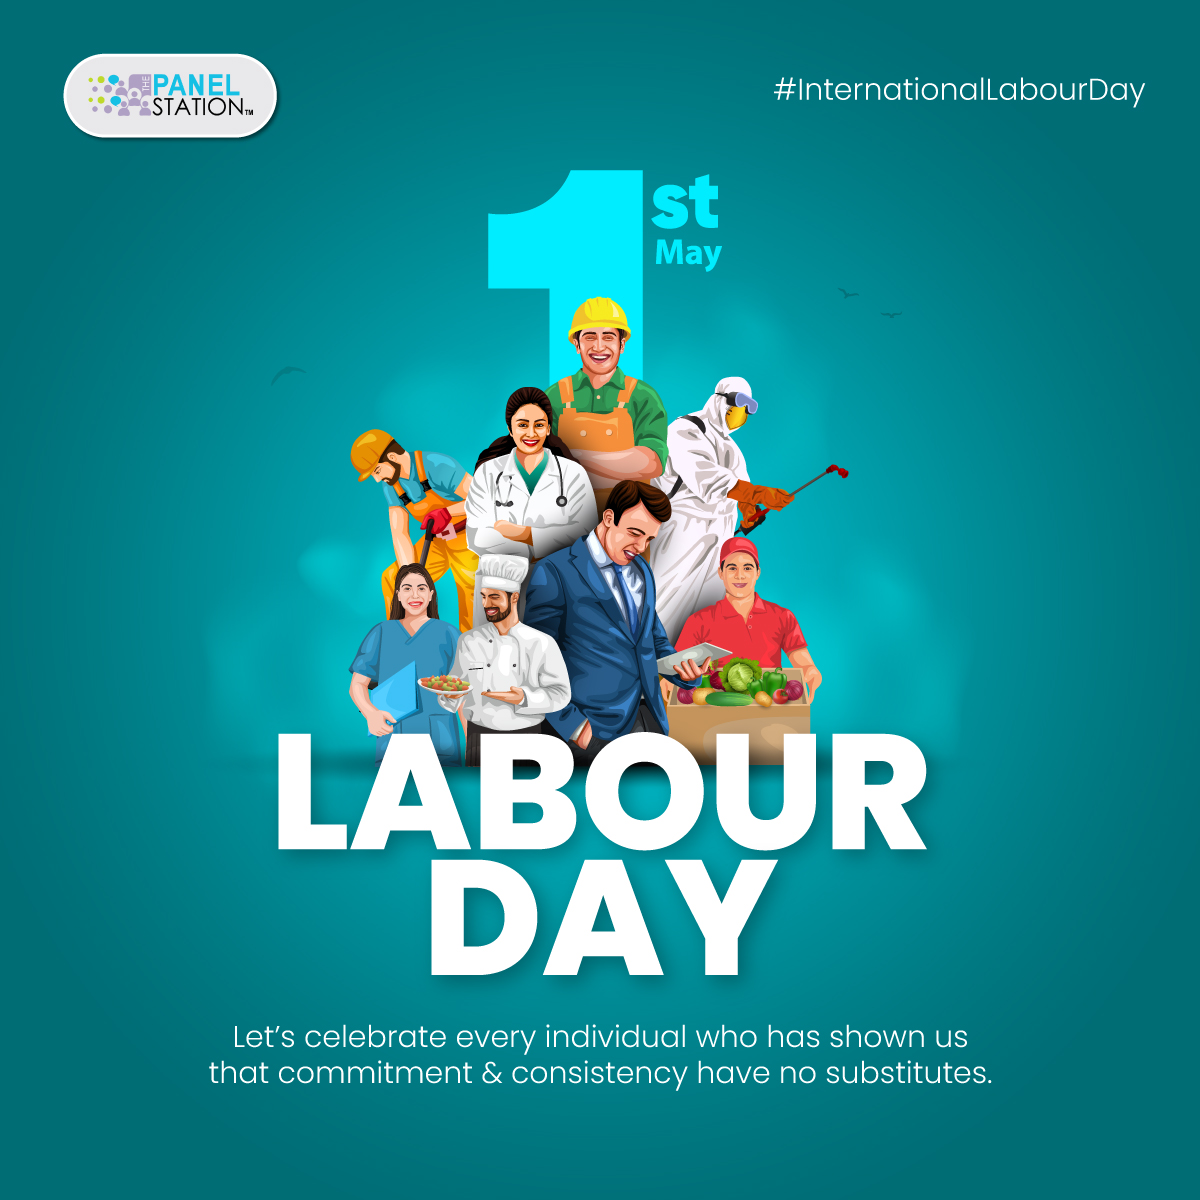 Dedication, determination, dignity: the essence of Labour Day. Let's celebrate the heart of the workforce. Happy International Labour Day!

#thepanelstation #tps #paidsurveys #onlinesurveys #surveysformoney #workersday #internationallabourday #labourday #matday #workusa